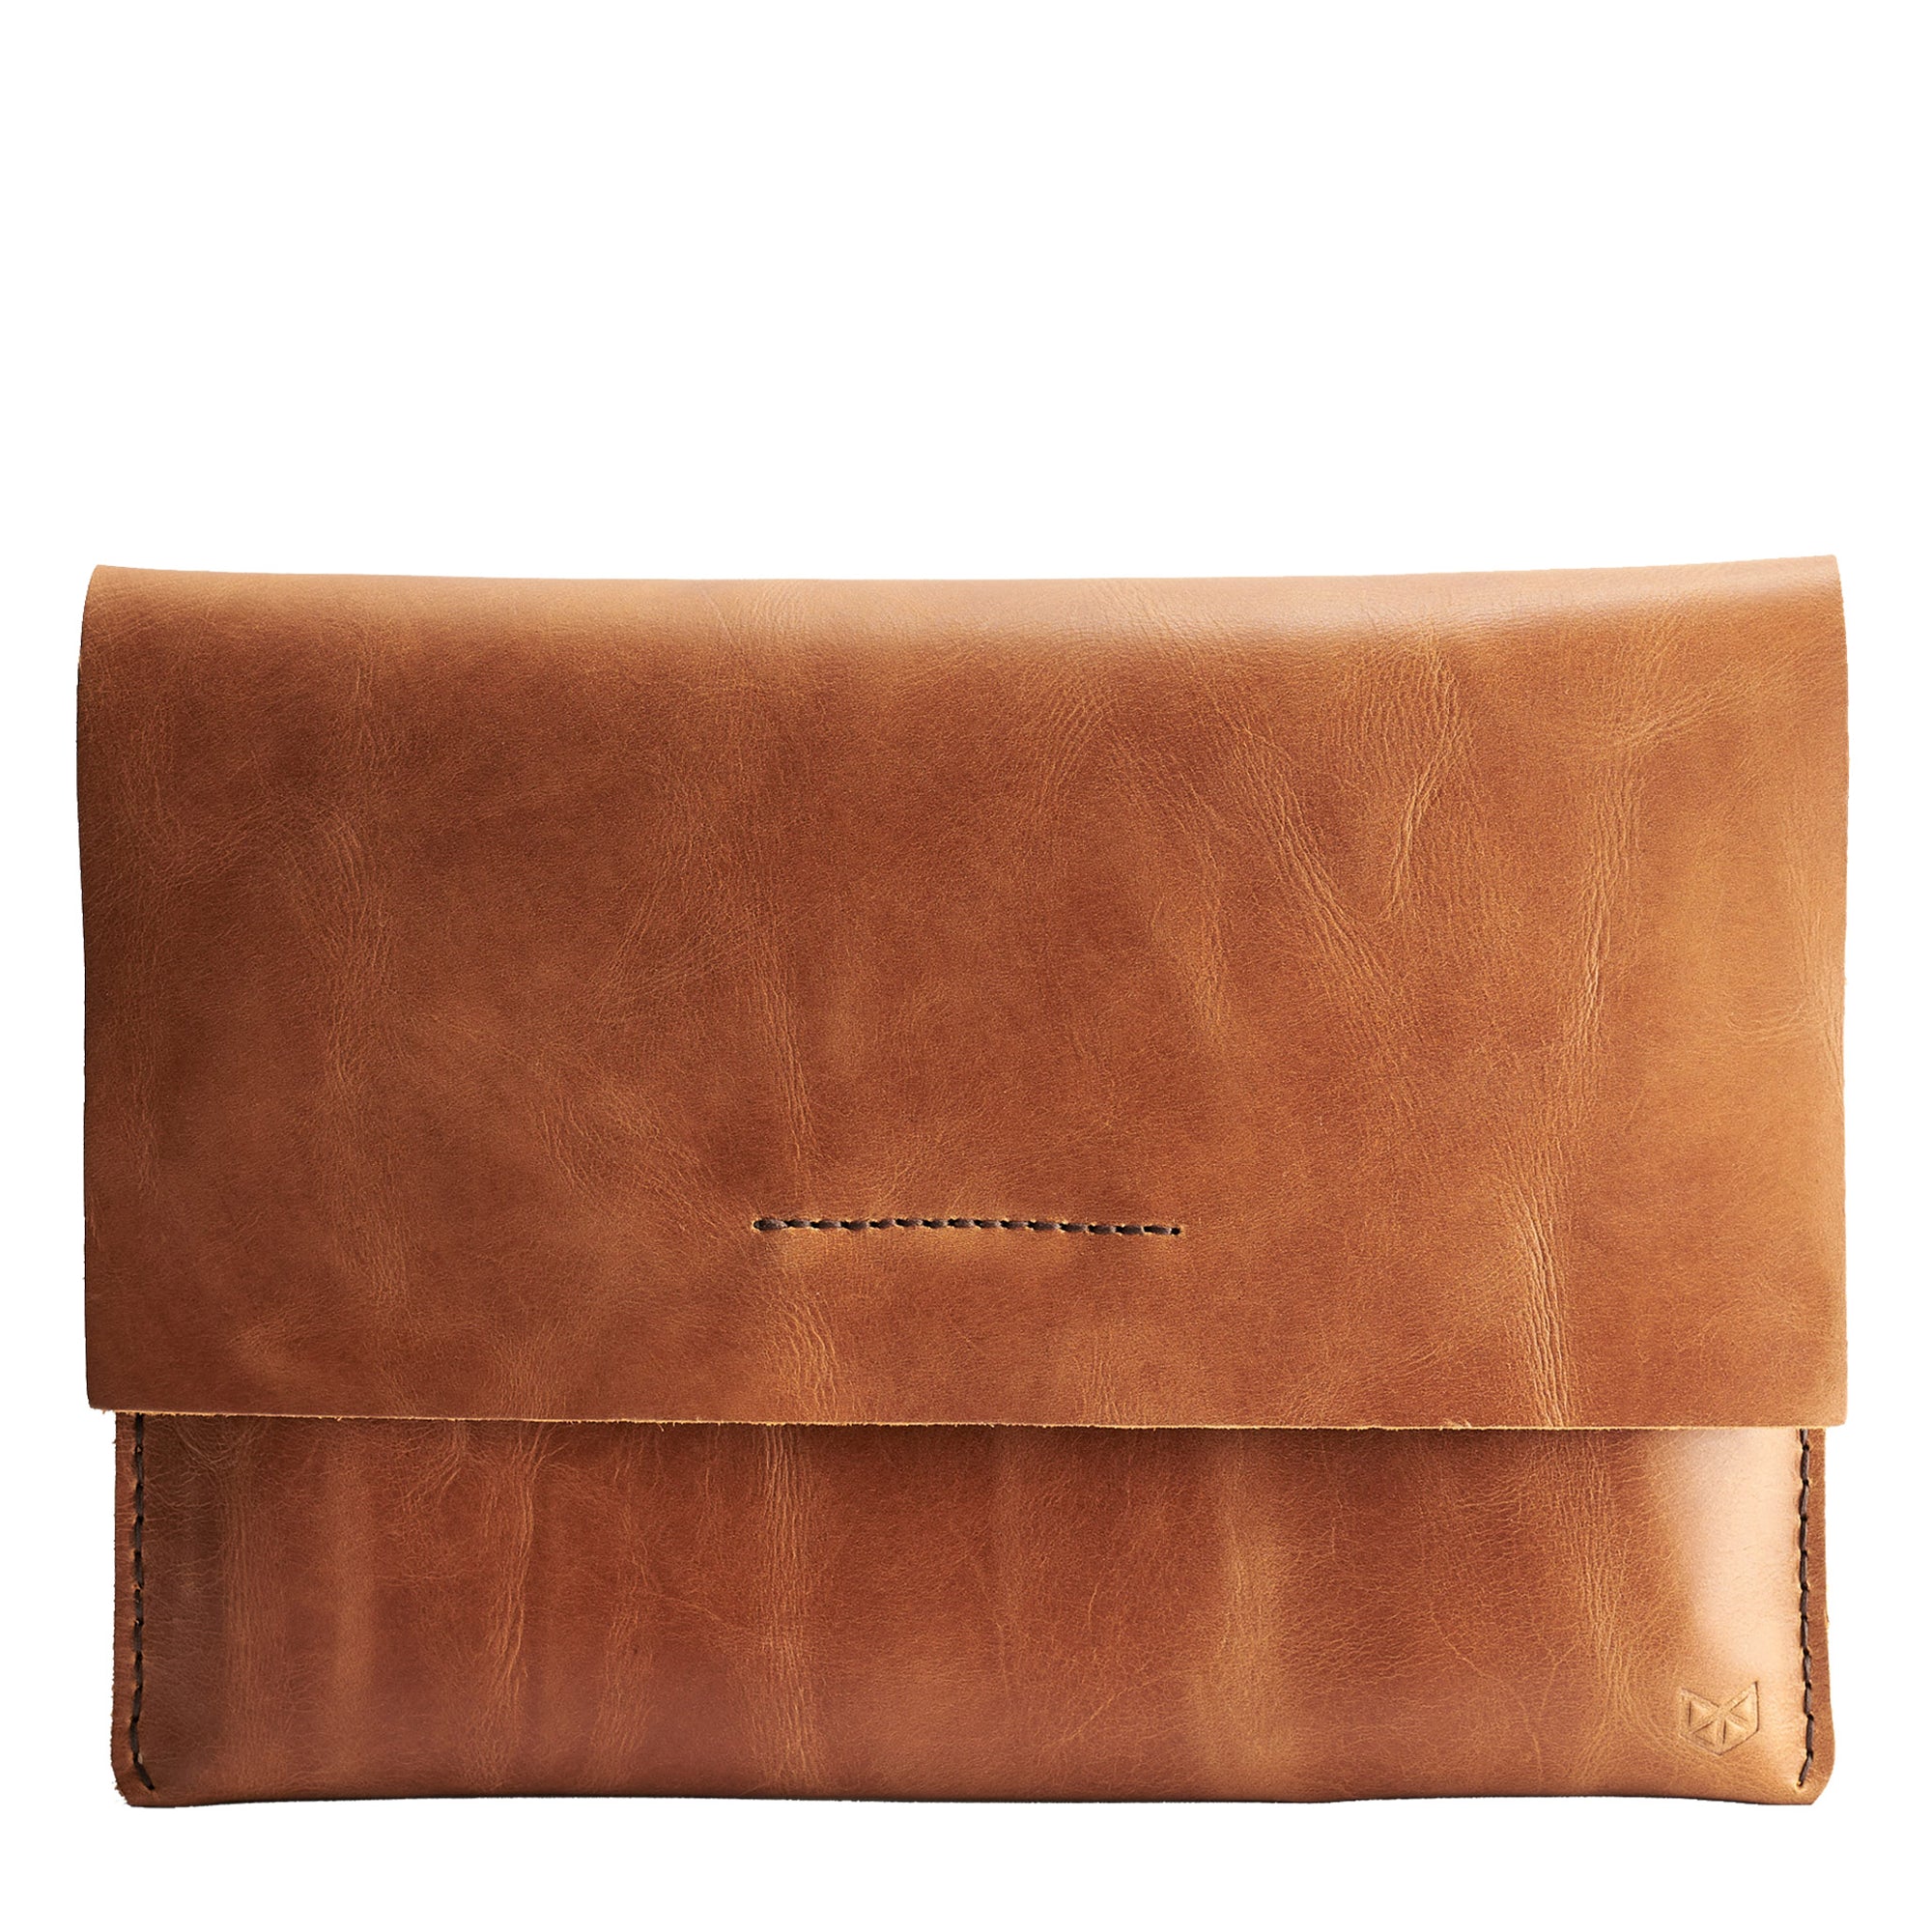 Cover. ASUS Zenbook Pro Duo light brown leather sleeve for men